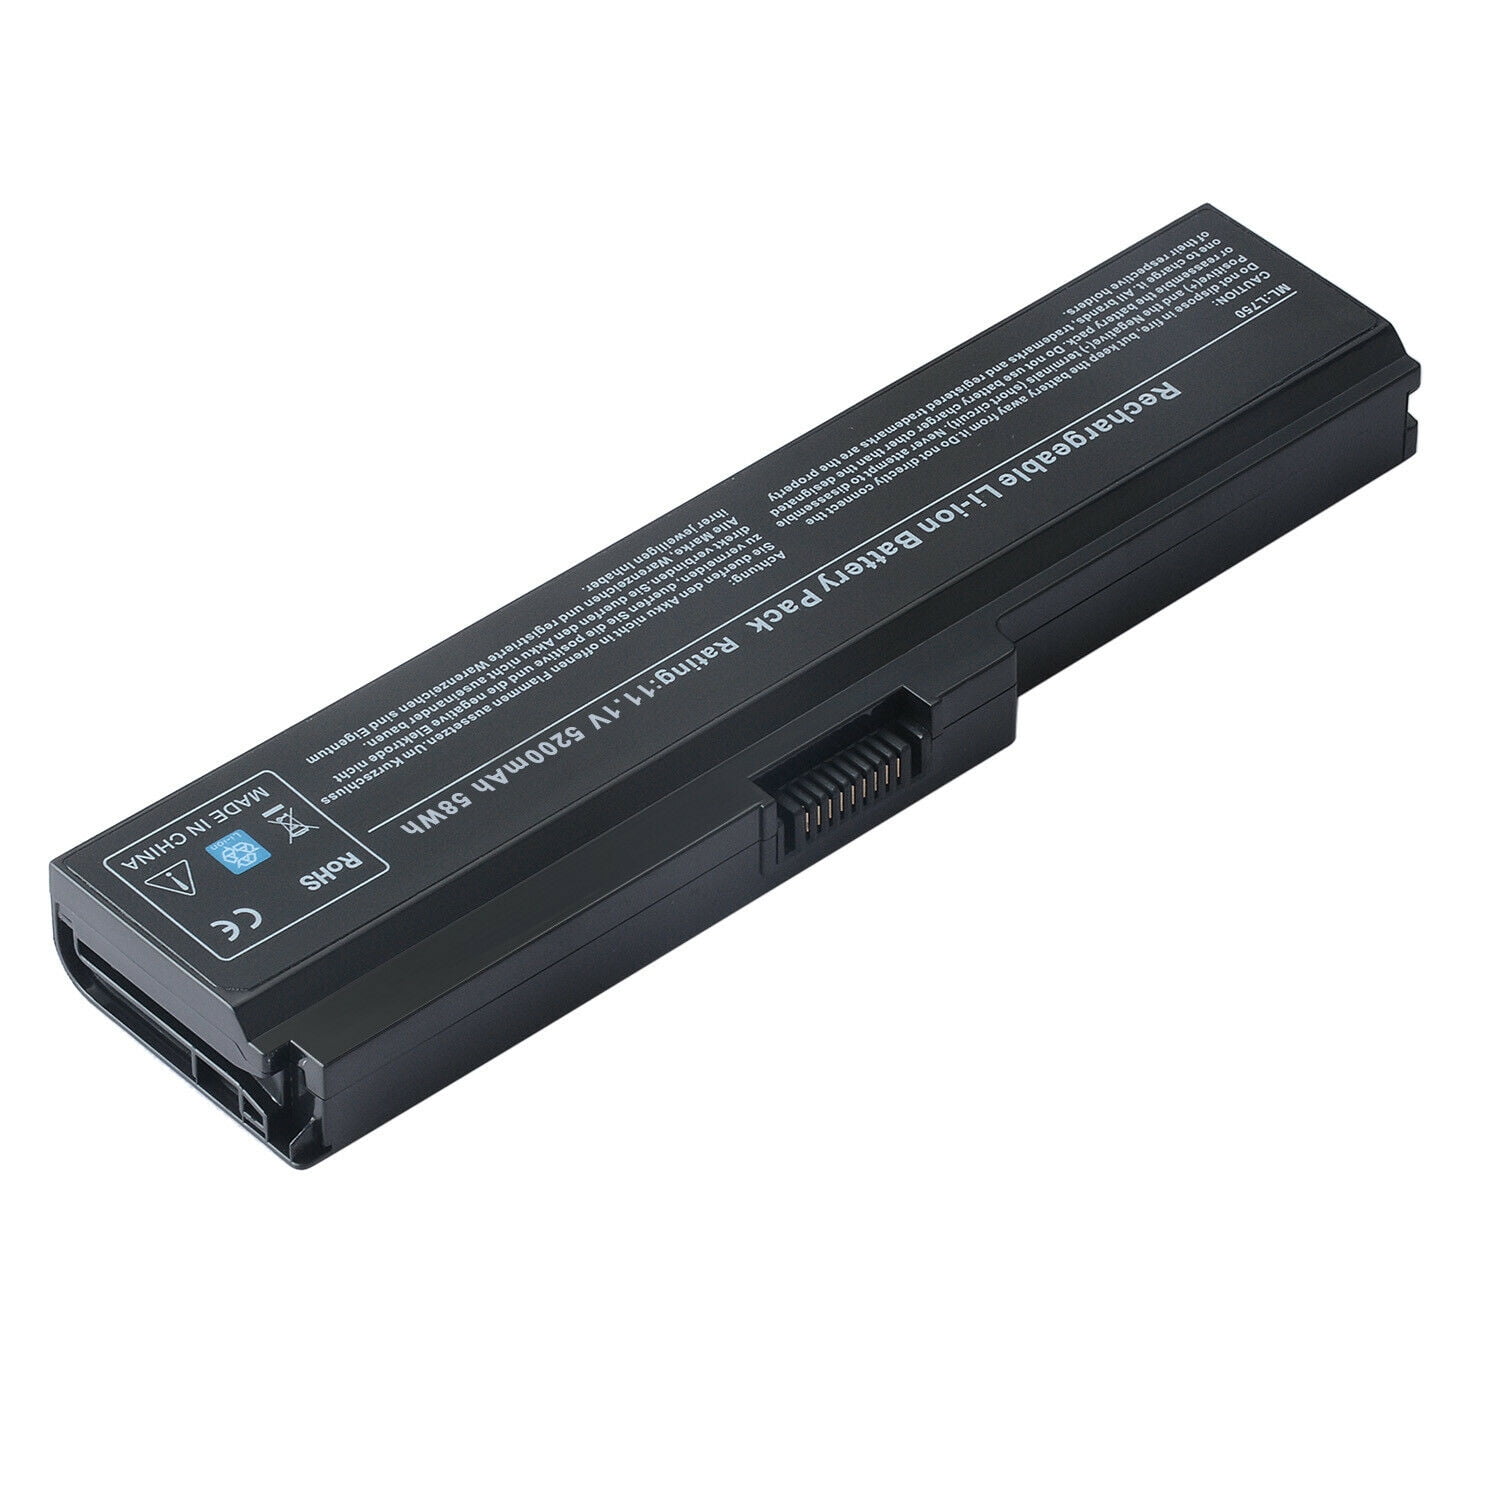 12Cell Battery PA3817U-1BAS for TOSHIBA Satellite C600D L750 A665 C640 C655 L655 